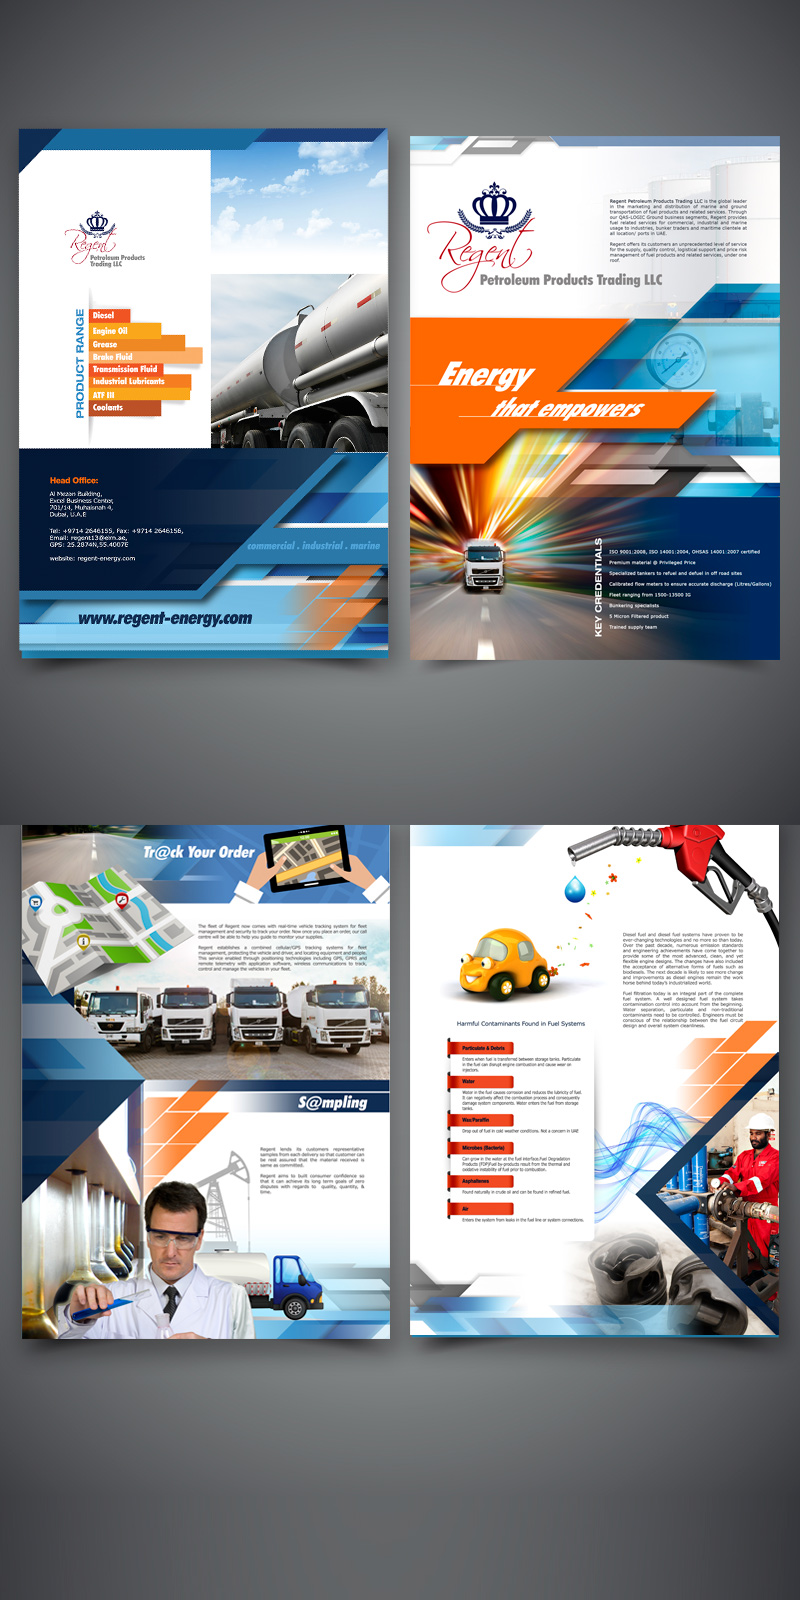 Company Brochure Design For Petroleum Industry Based in UAE